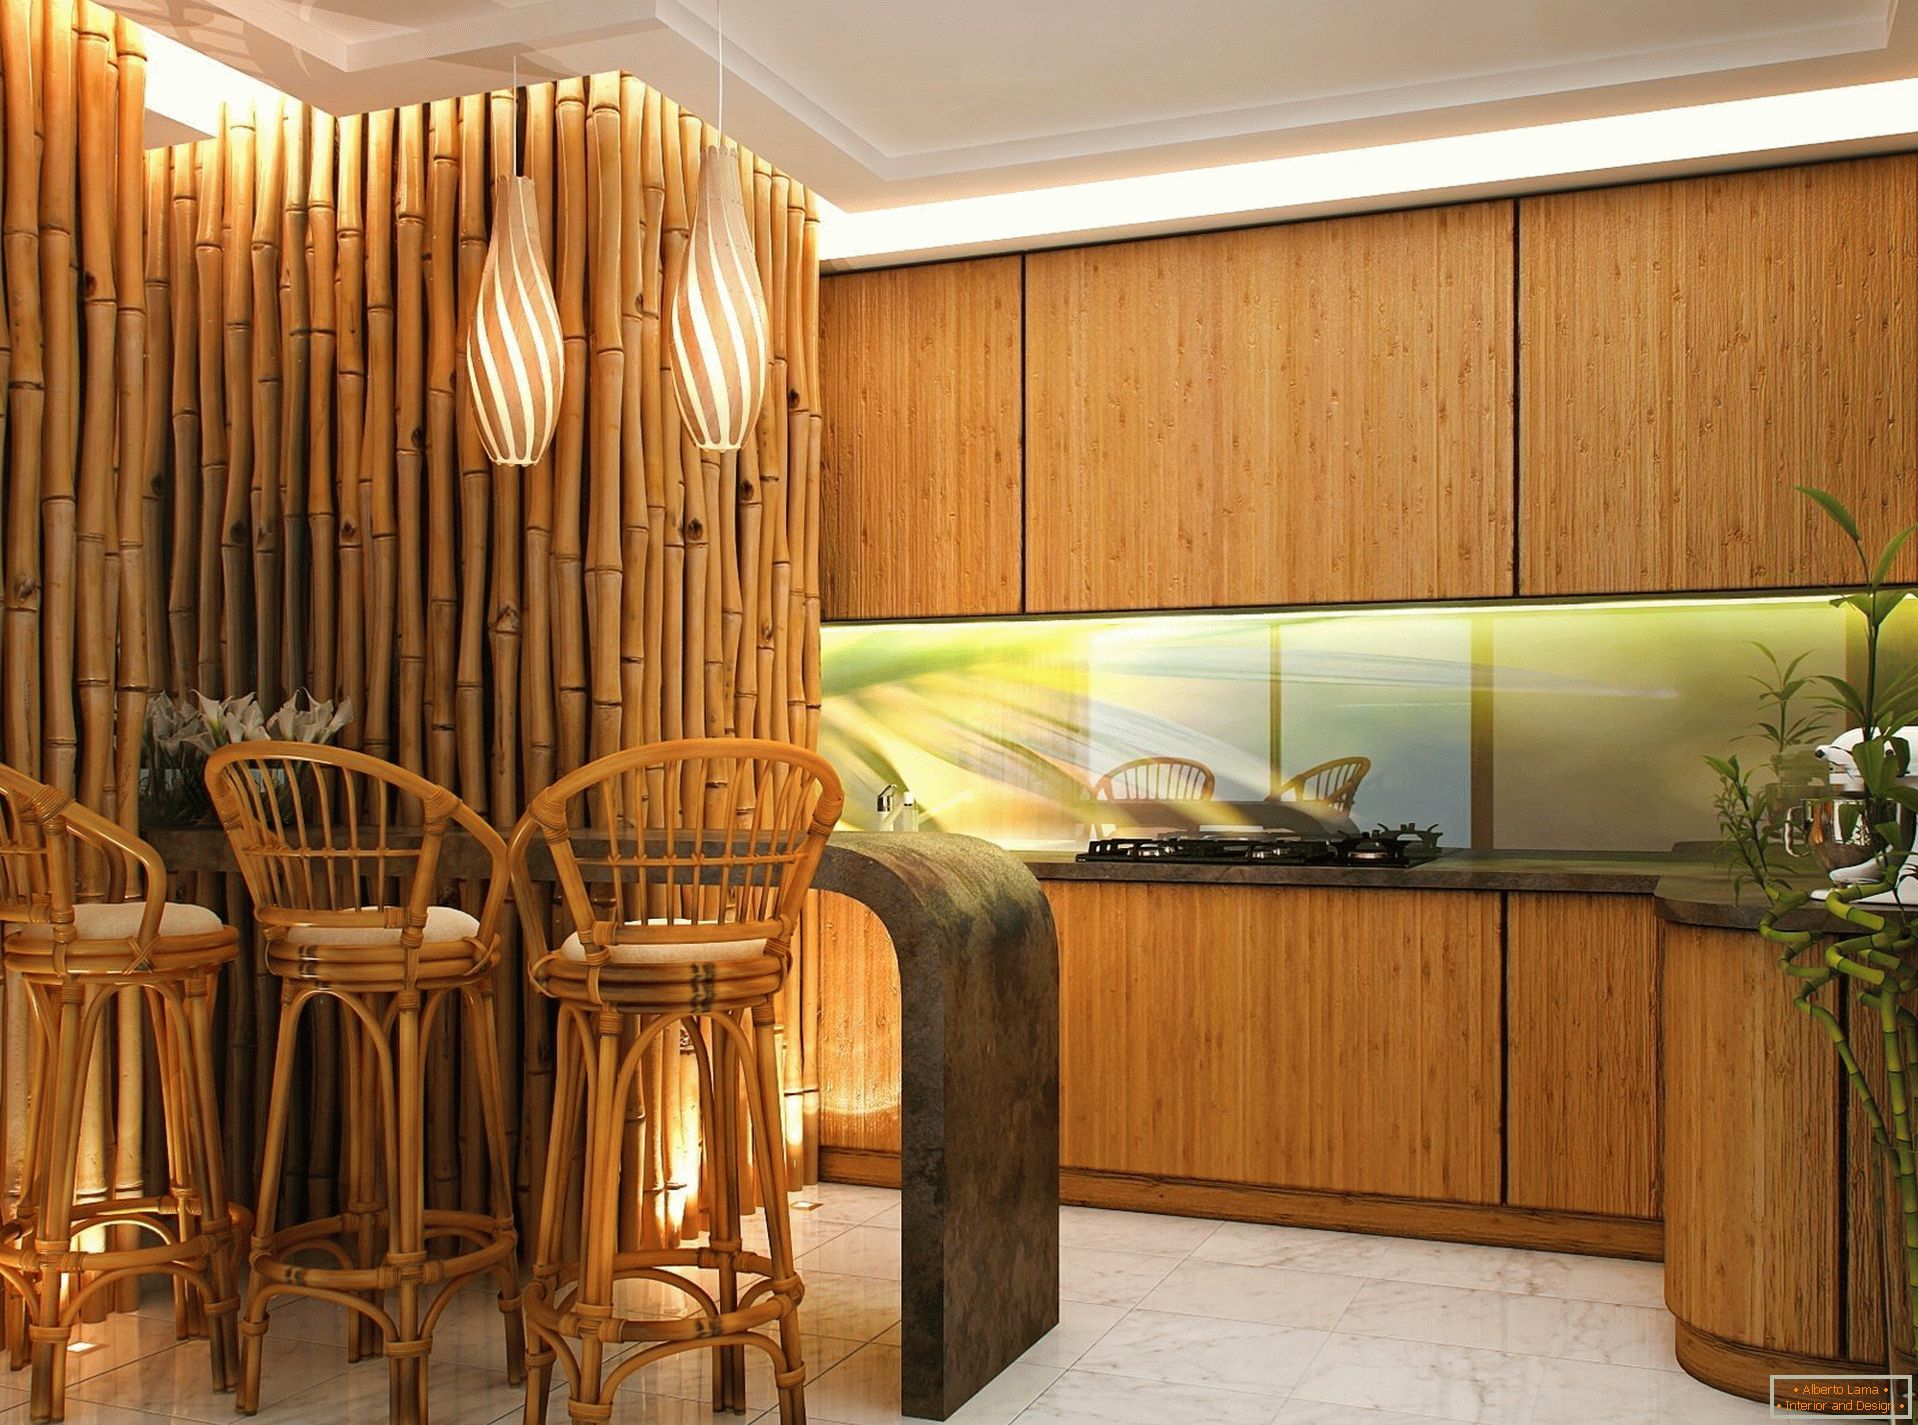 Bamboo Furniture: A Natural And Sustainable Option For Your Home